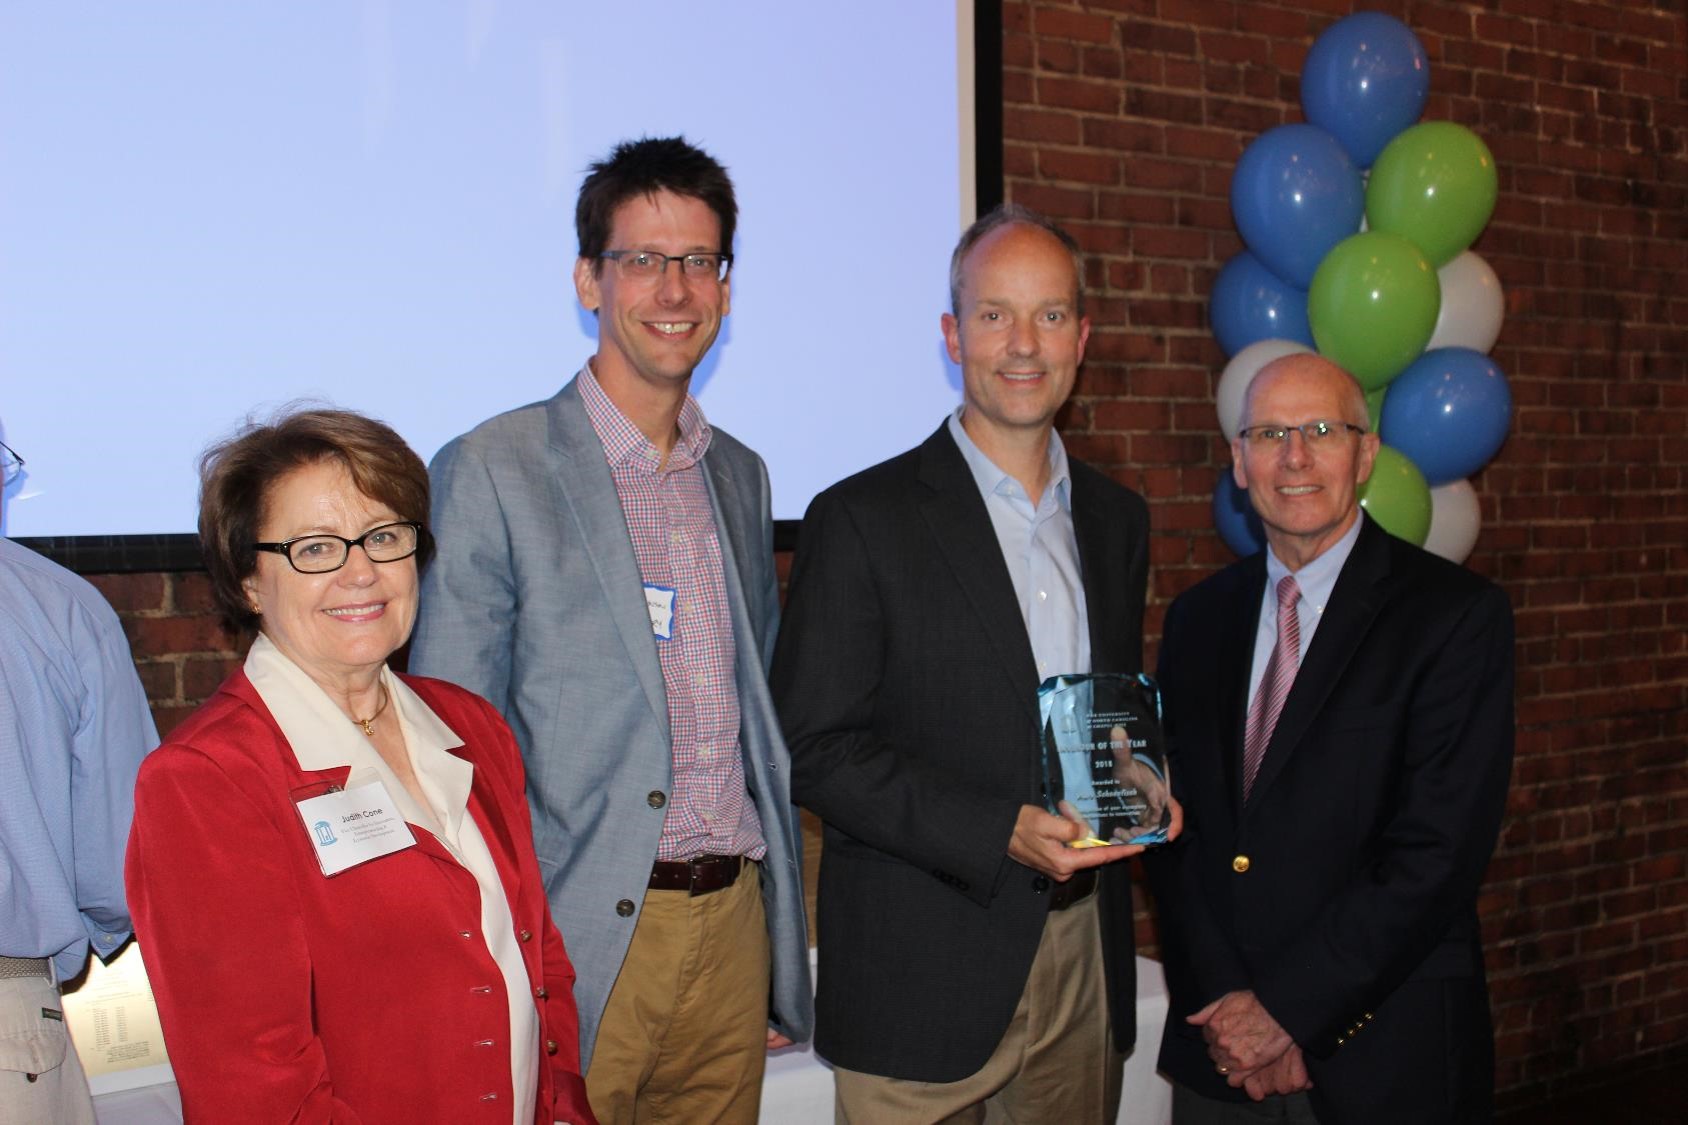 Mark Schoenfisch, professor of chemistry (third from left) holds the UNC Inventor of the Year Award. Also pictured: Judith Cone, vice chancellor for innovation, entrepreneurship and economic development (left); Jeff Johnson, A. Ronald Gallant Distinguished Professor and chair, UNC Department of Chemistry (second from left); and Bob Blouin, executive vice chancellor and provost (right)